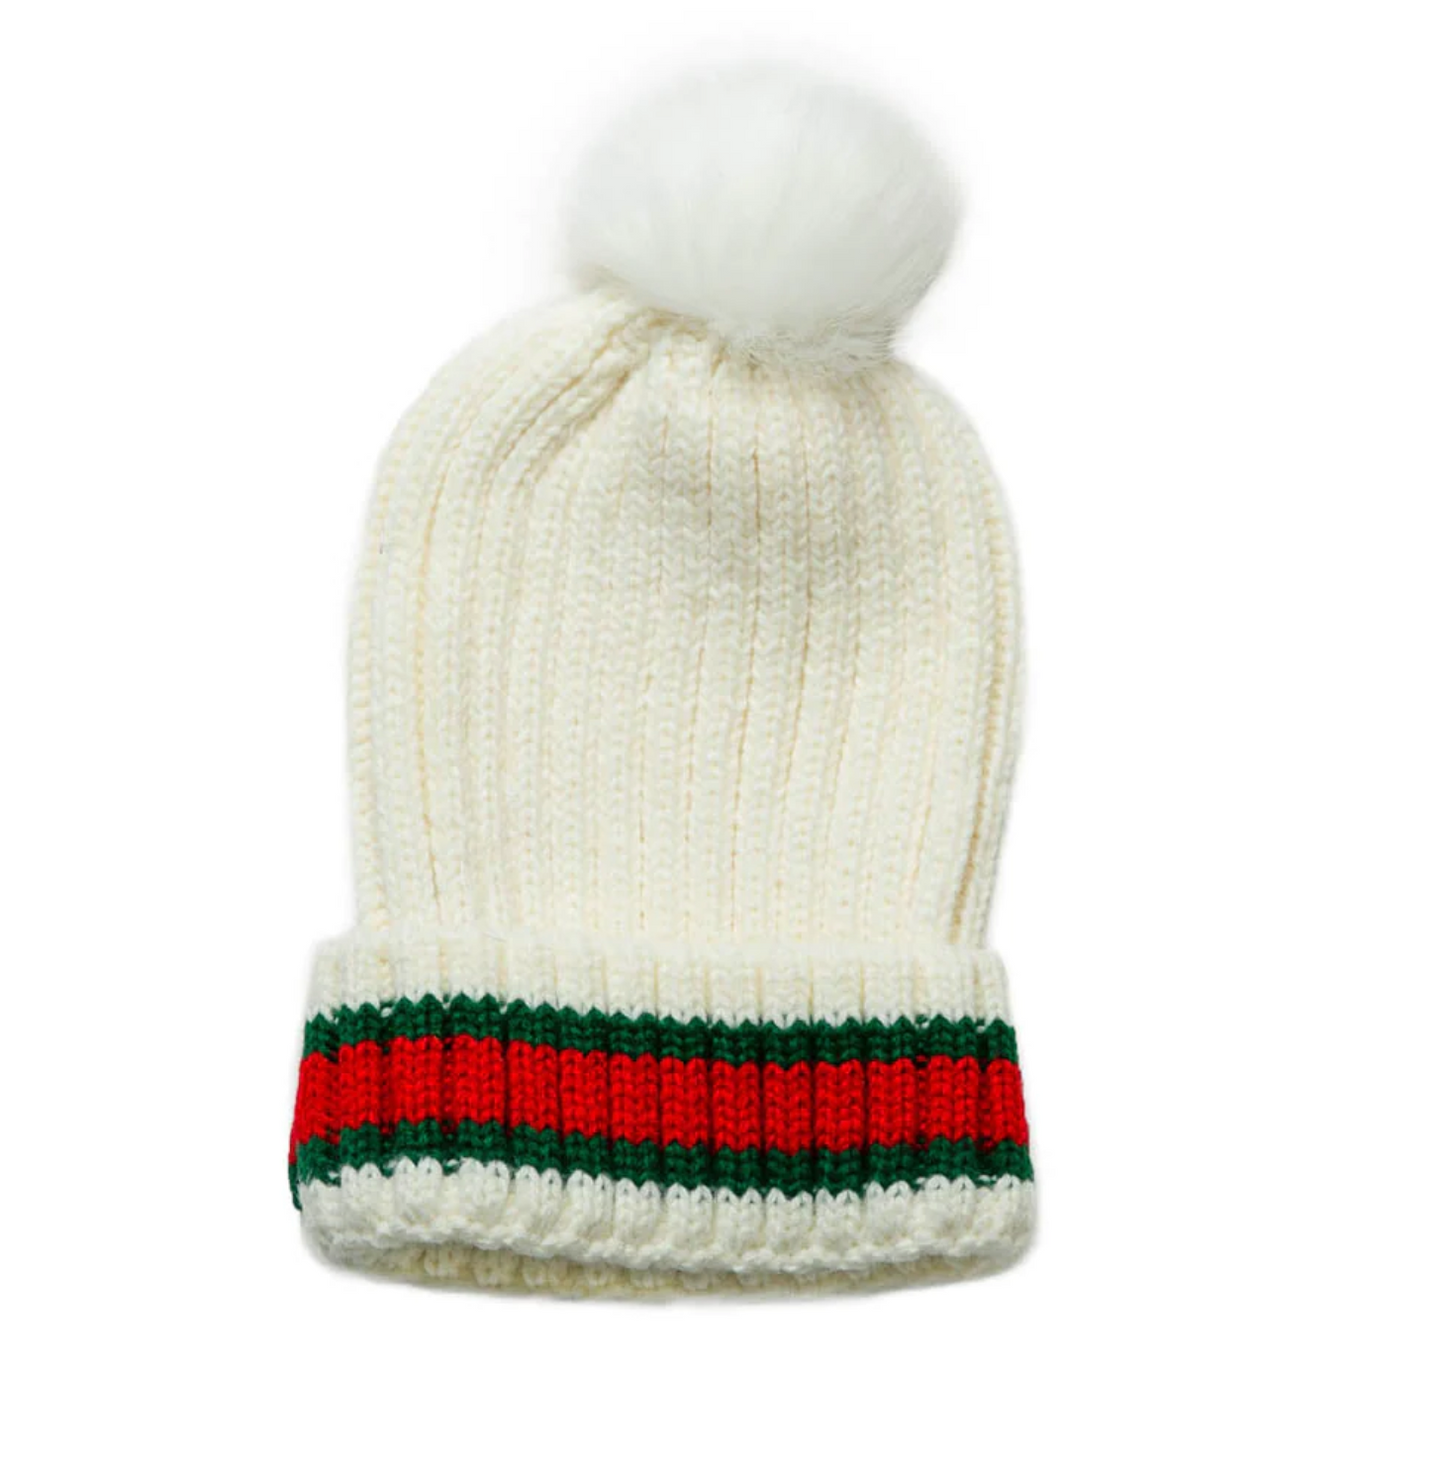 Knit Hat with Red and Green Stripe Faux Fur Pom Pom - 2 Colors